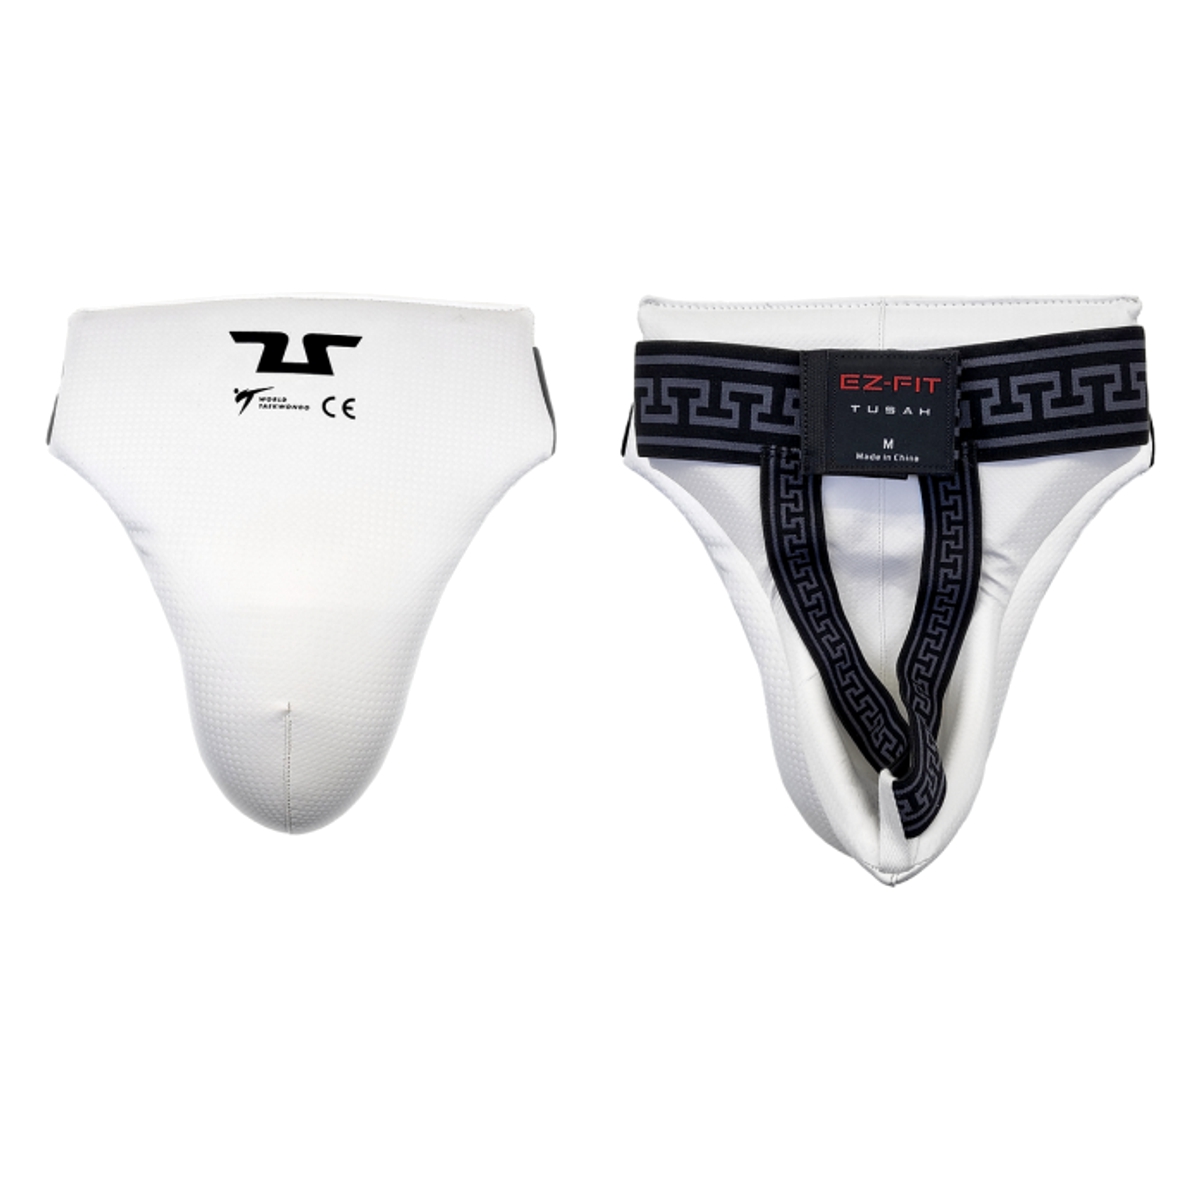 Tusah WT Taekwondo Competition Approved Male Groin Guard - Click Image to Close